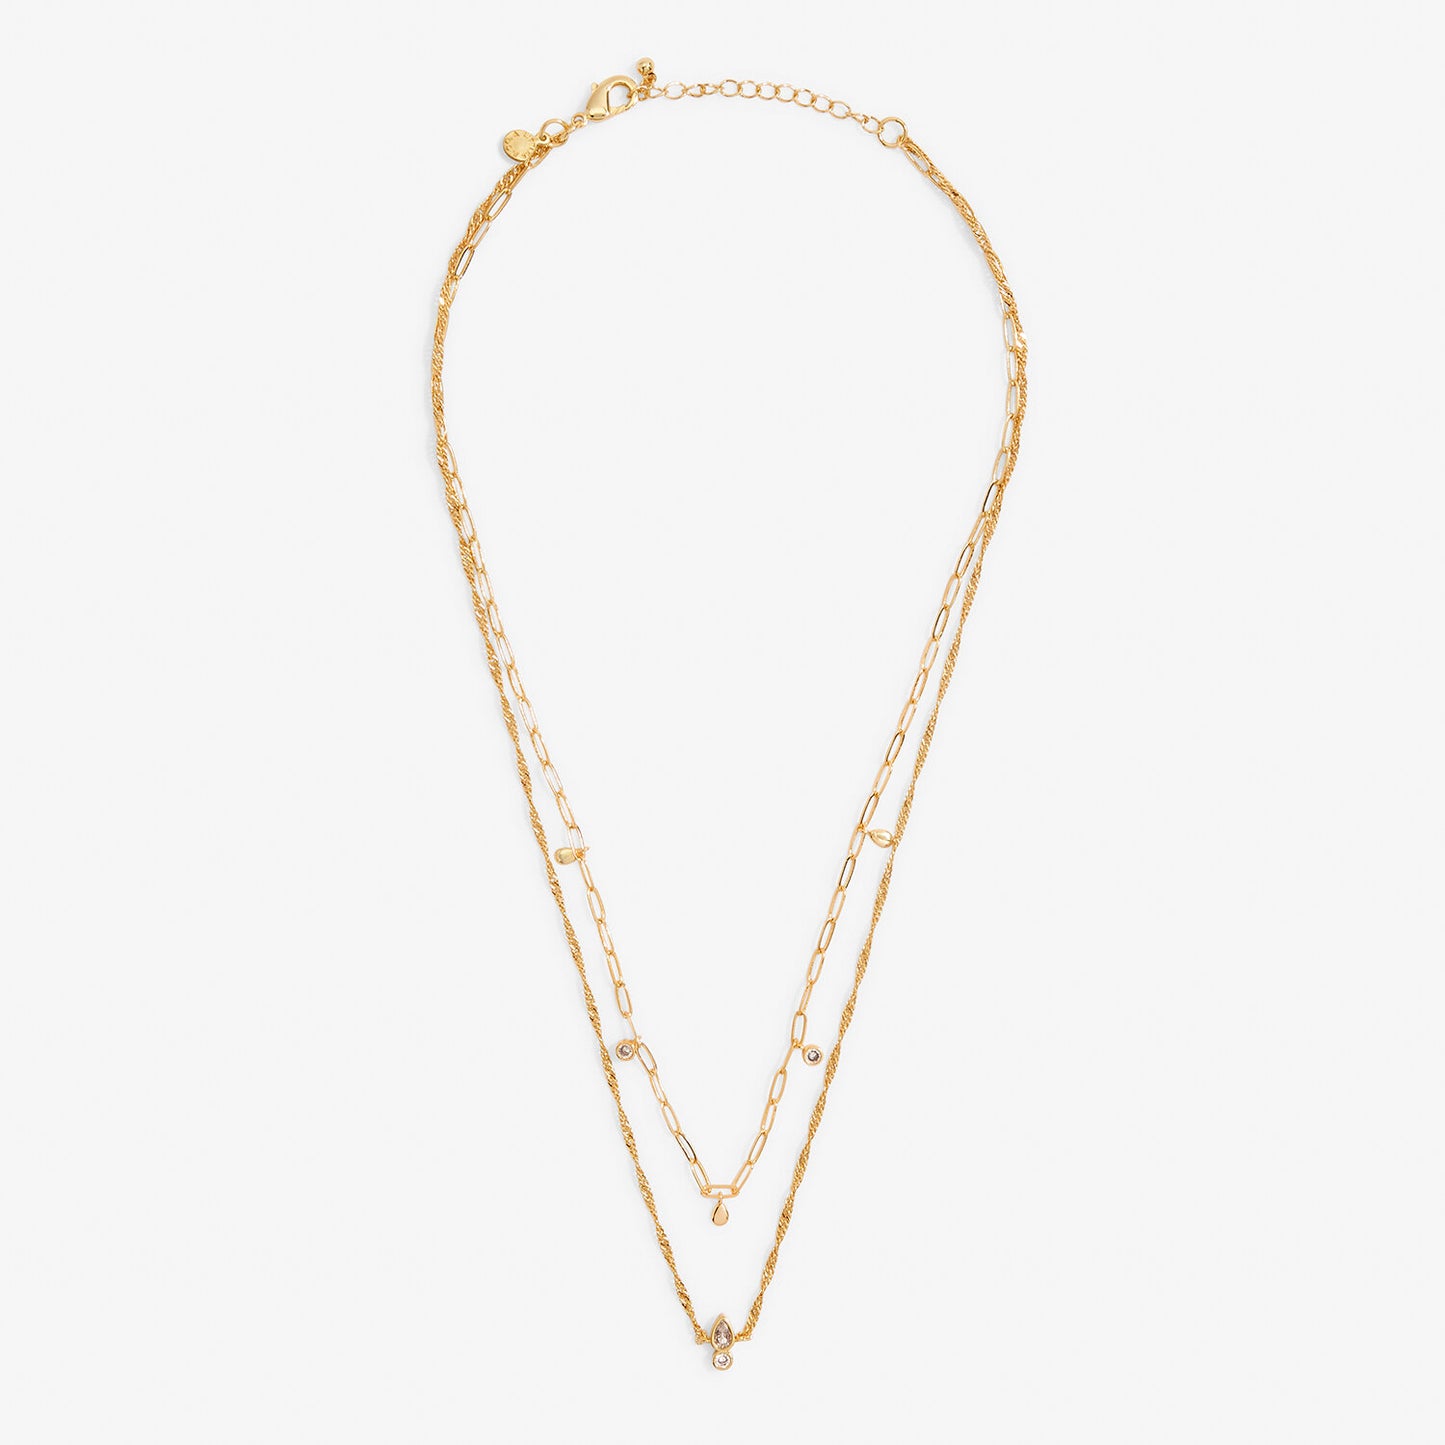 Stacks Of Style Organic Shape Necklace in Gold-Tone Plating